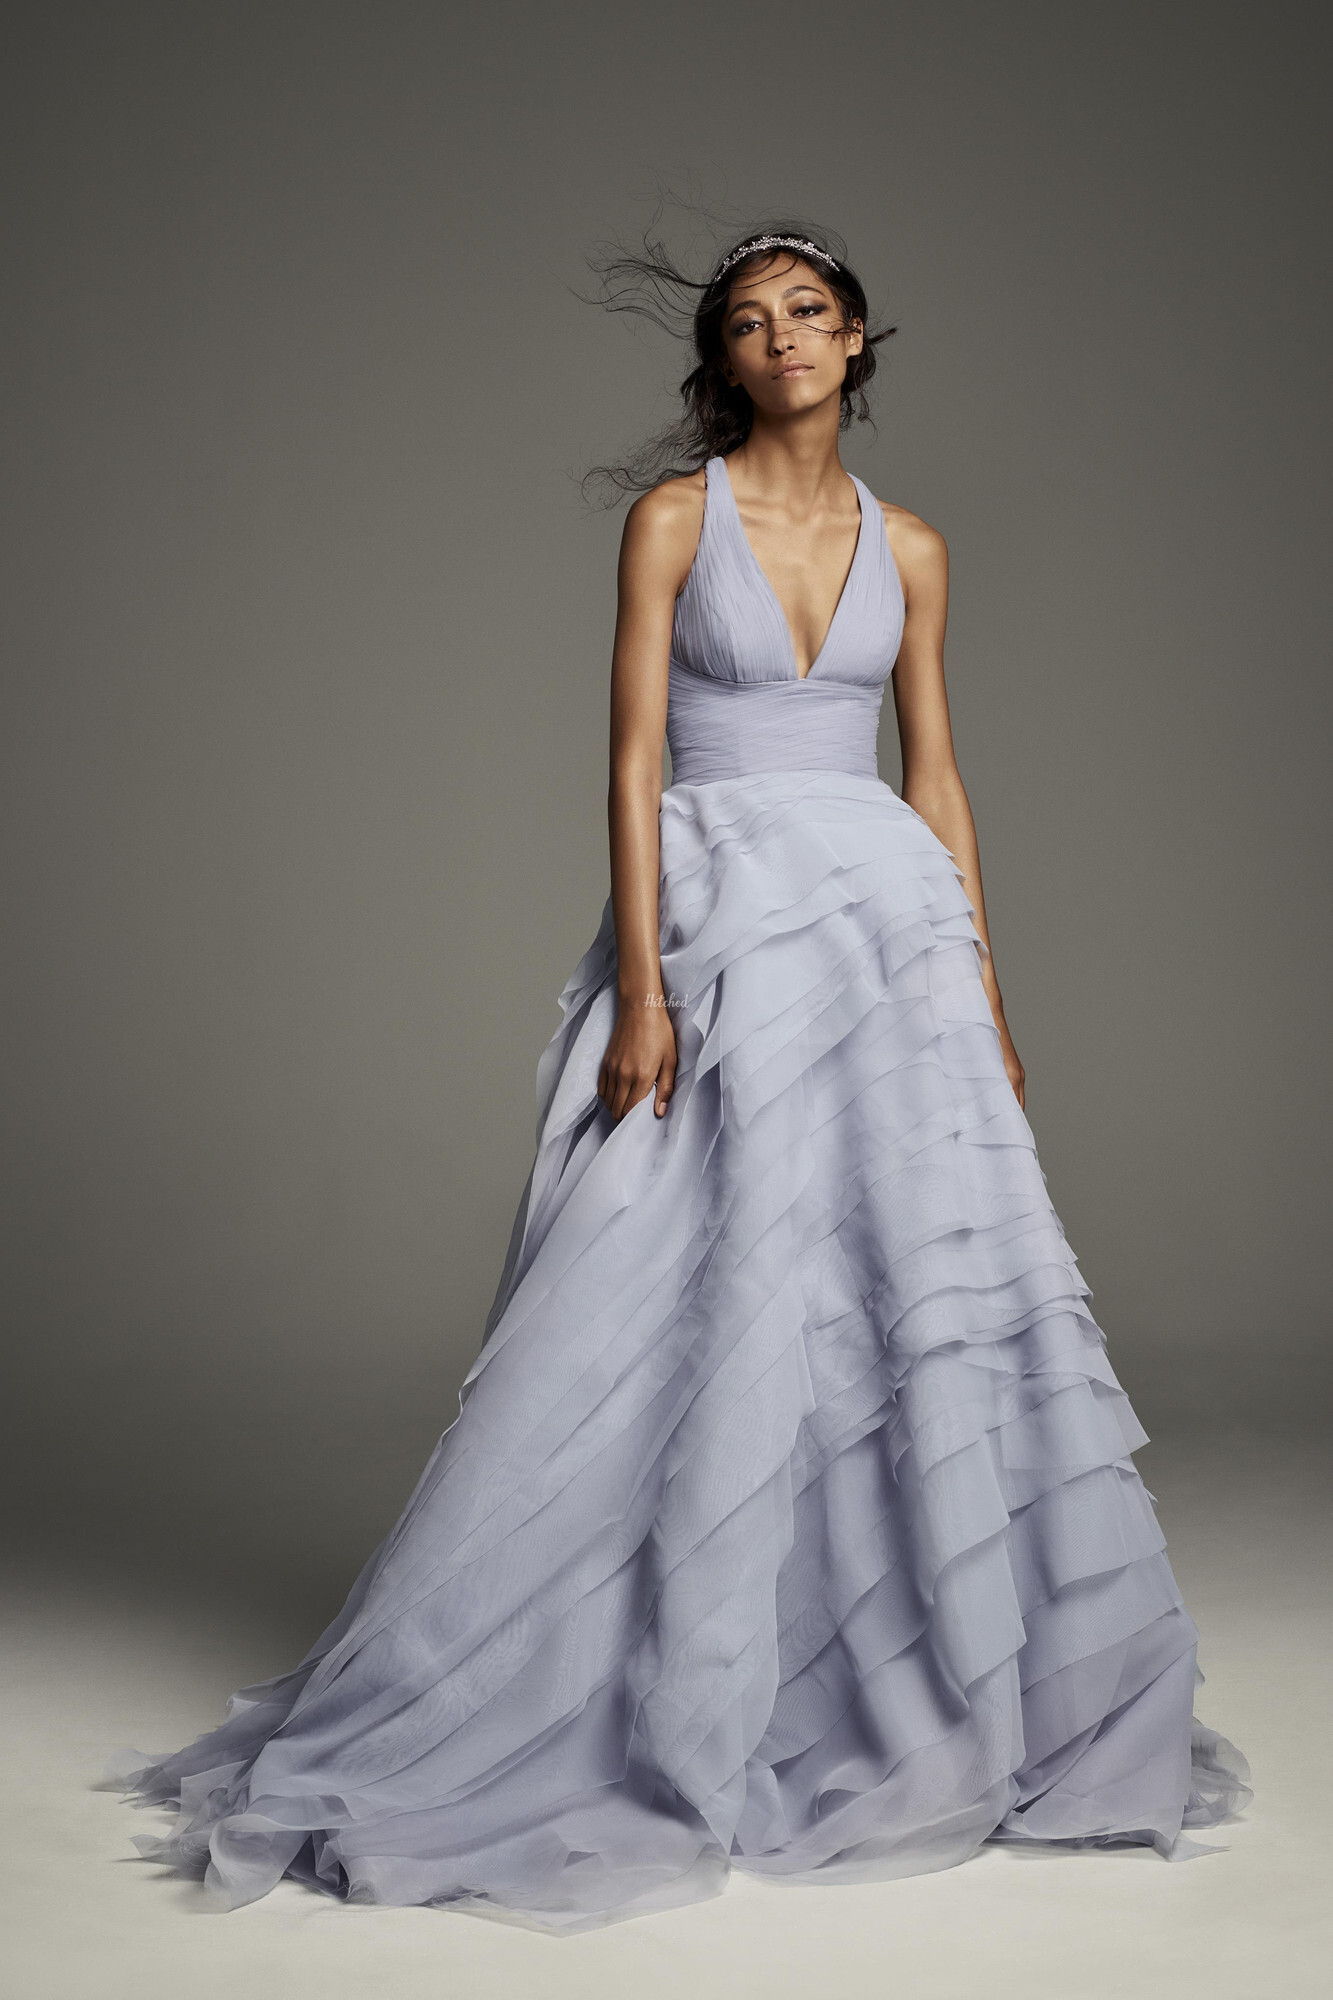 Glamour Exclusive: Here's a Sneak Peek at Vera Wang's Latest